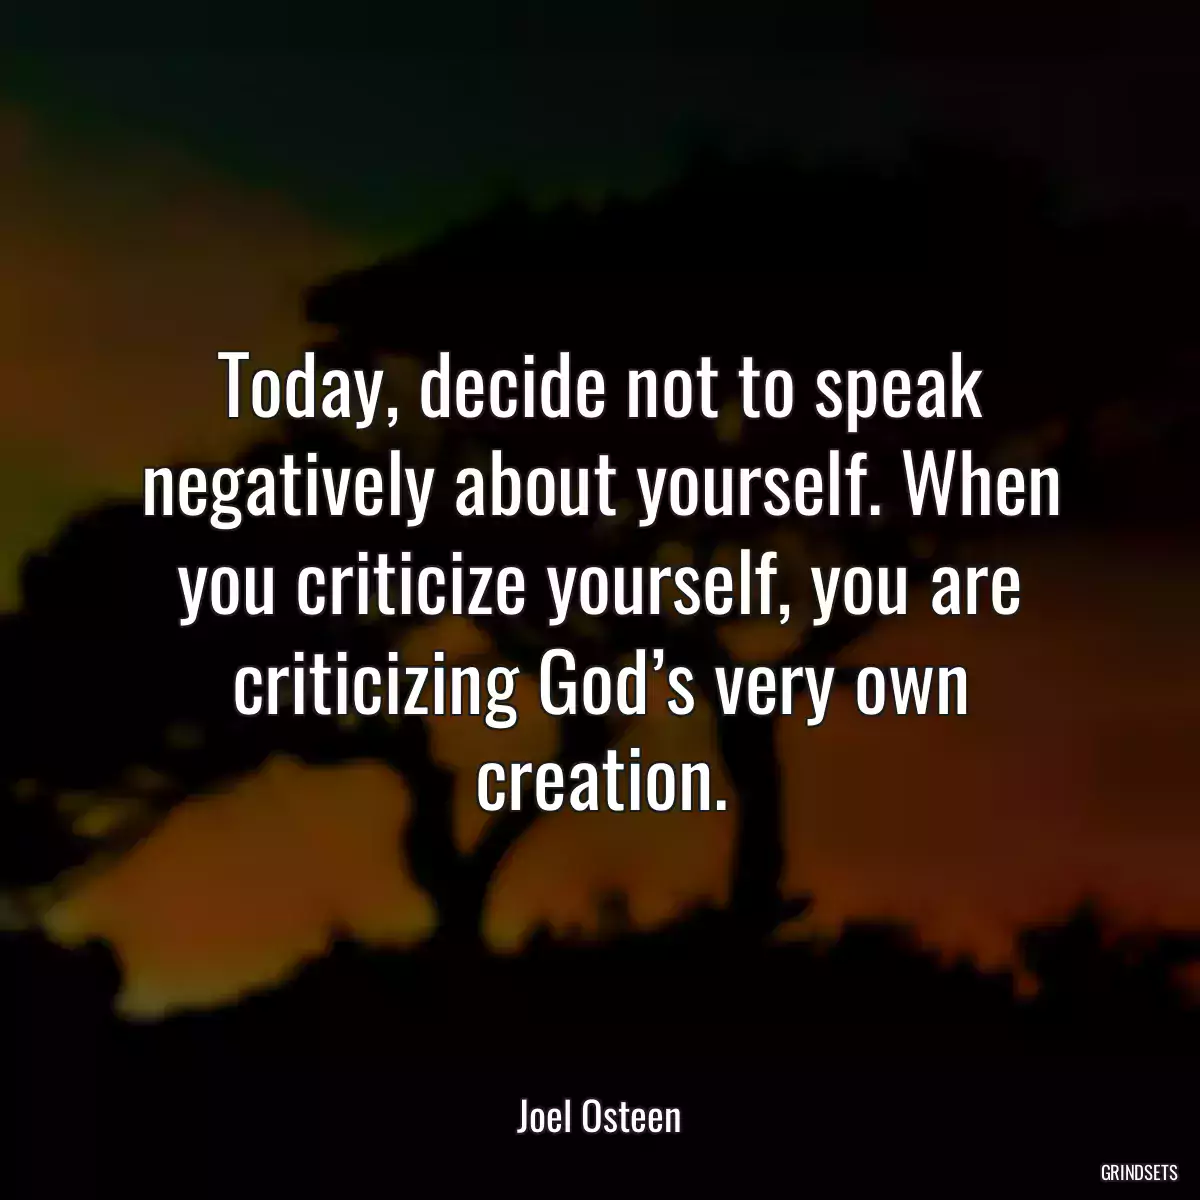 Today, decide not to speak negatively about yourself. When you criticize yourself, you are criticizing God’s very own creation.